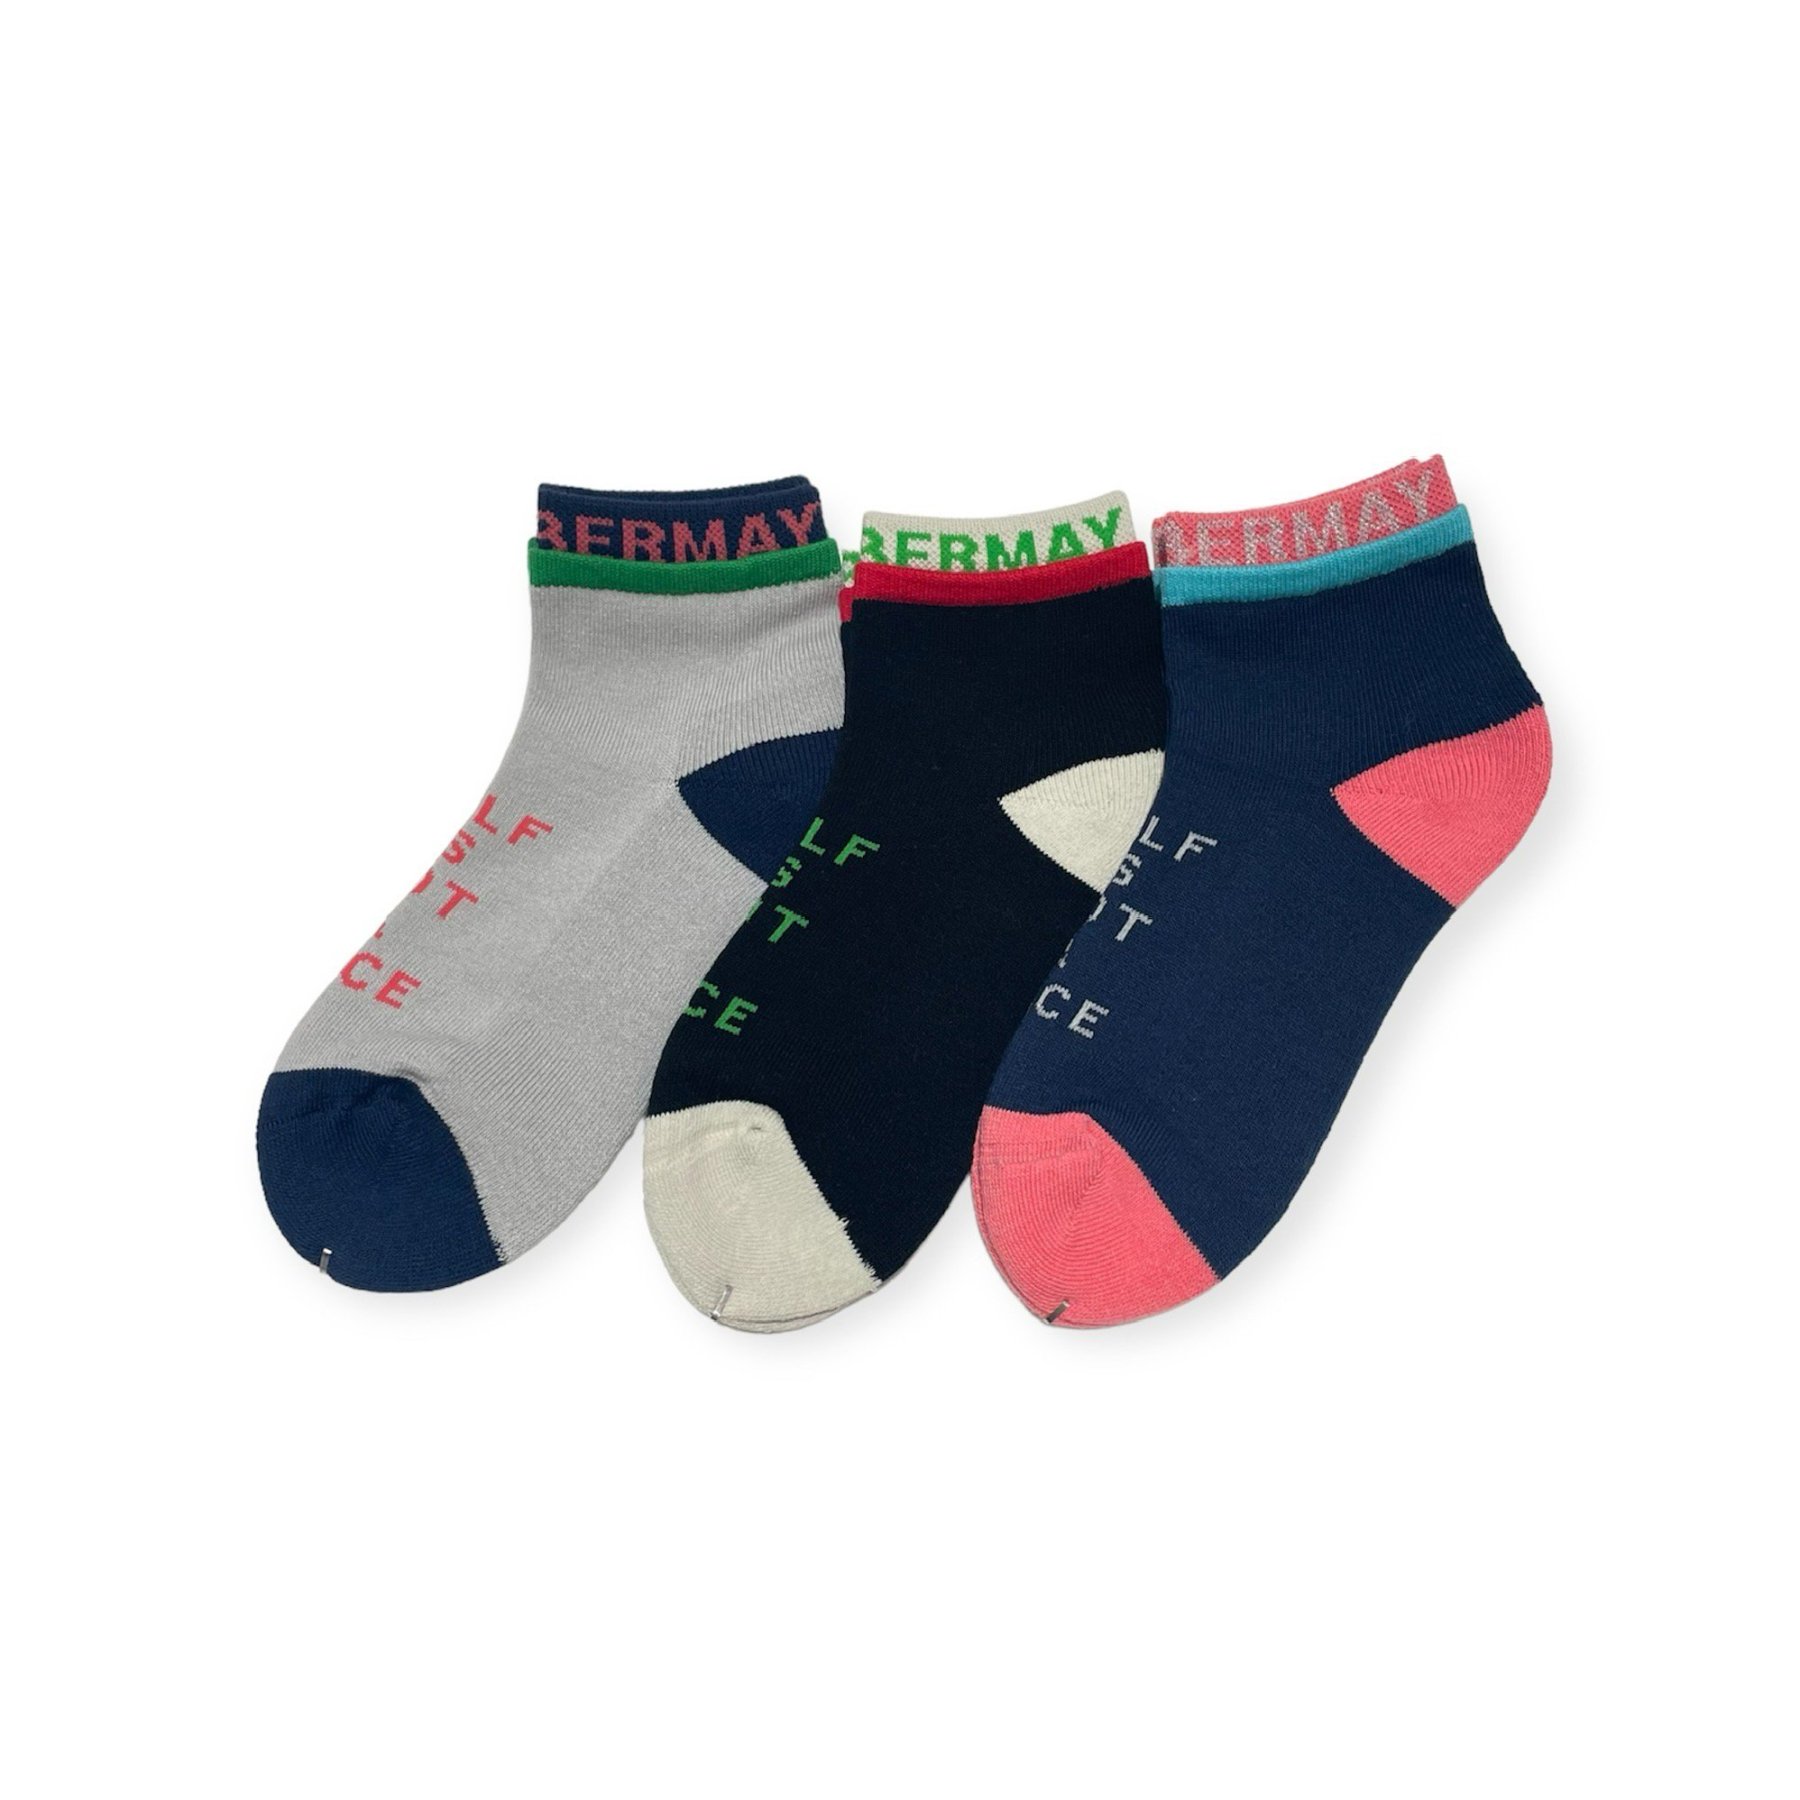 <img class='new_mark_img1' src='https://img.shop-pro.jp/img/new/icons5.gif' style='border:none;display:inline;margin:0px;padding:0px;width:auto;' />Double rib ankle socks/WOMEN